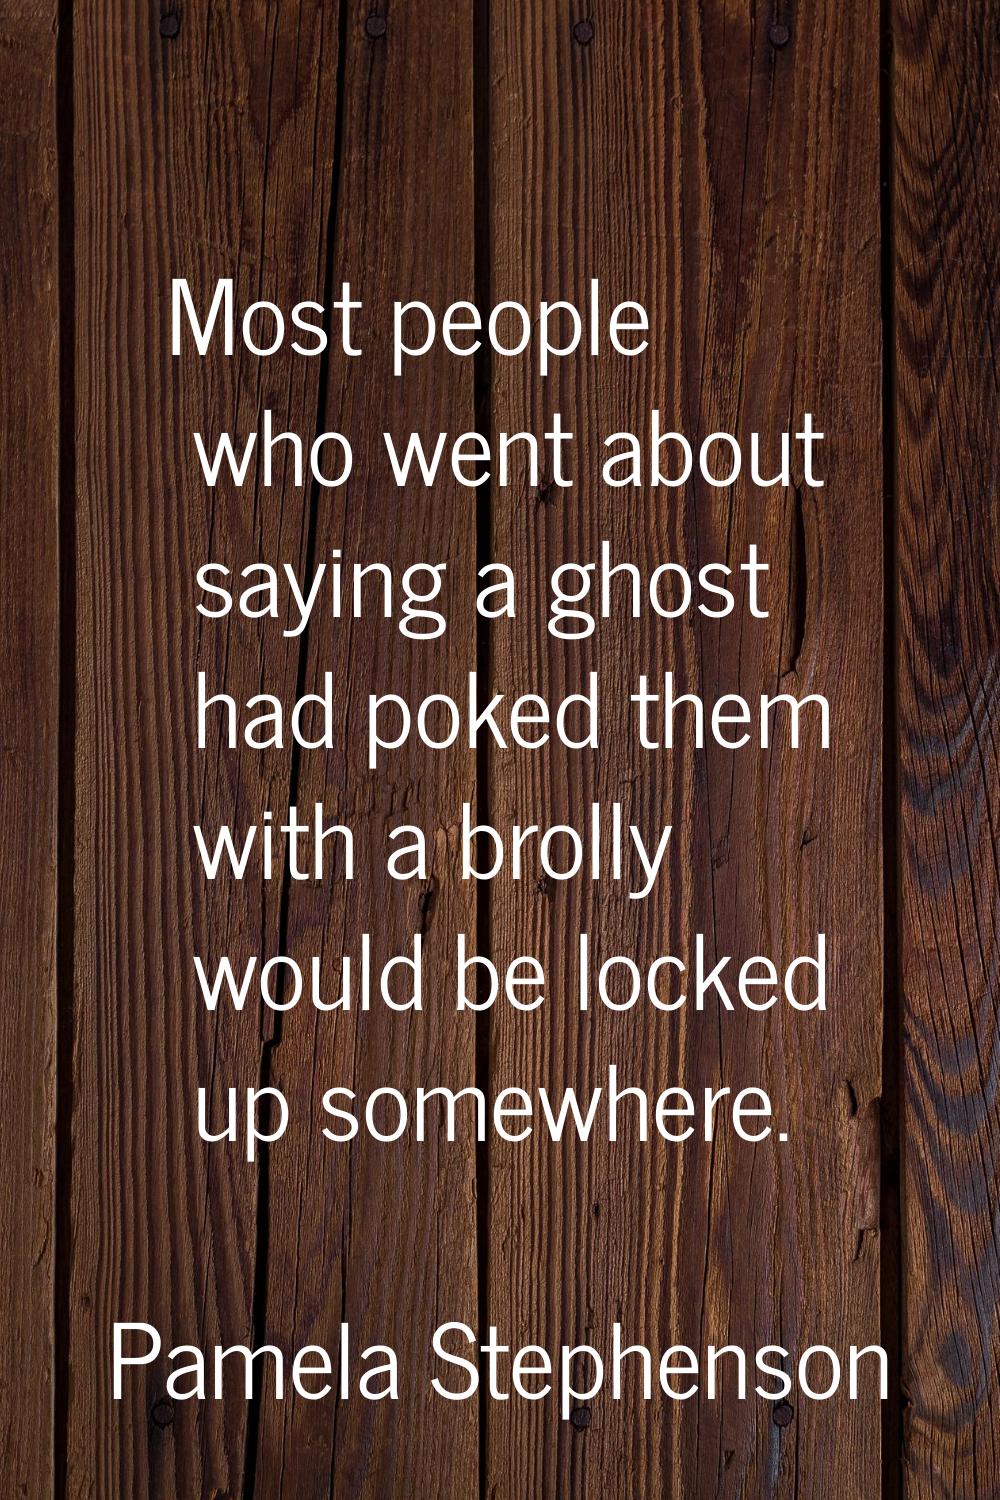 Most people who went about saying a ghost had poked them with a brolly would be locked up somewhere